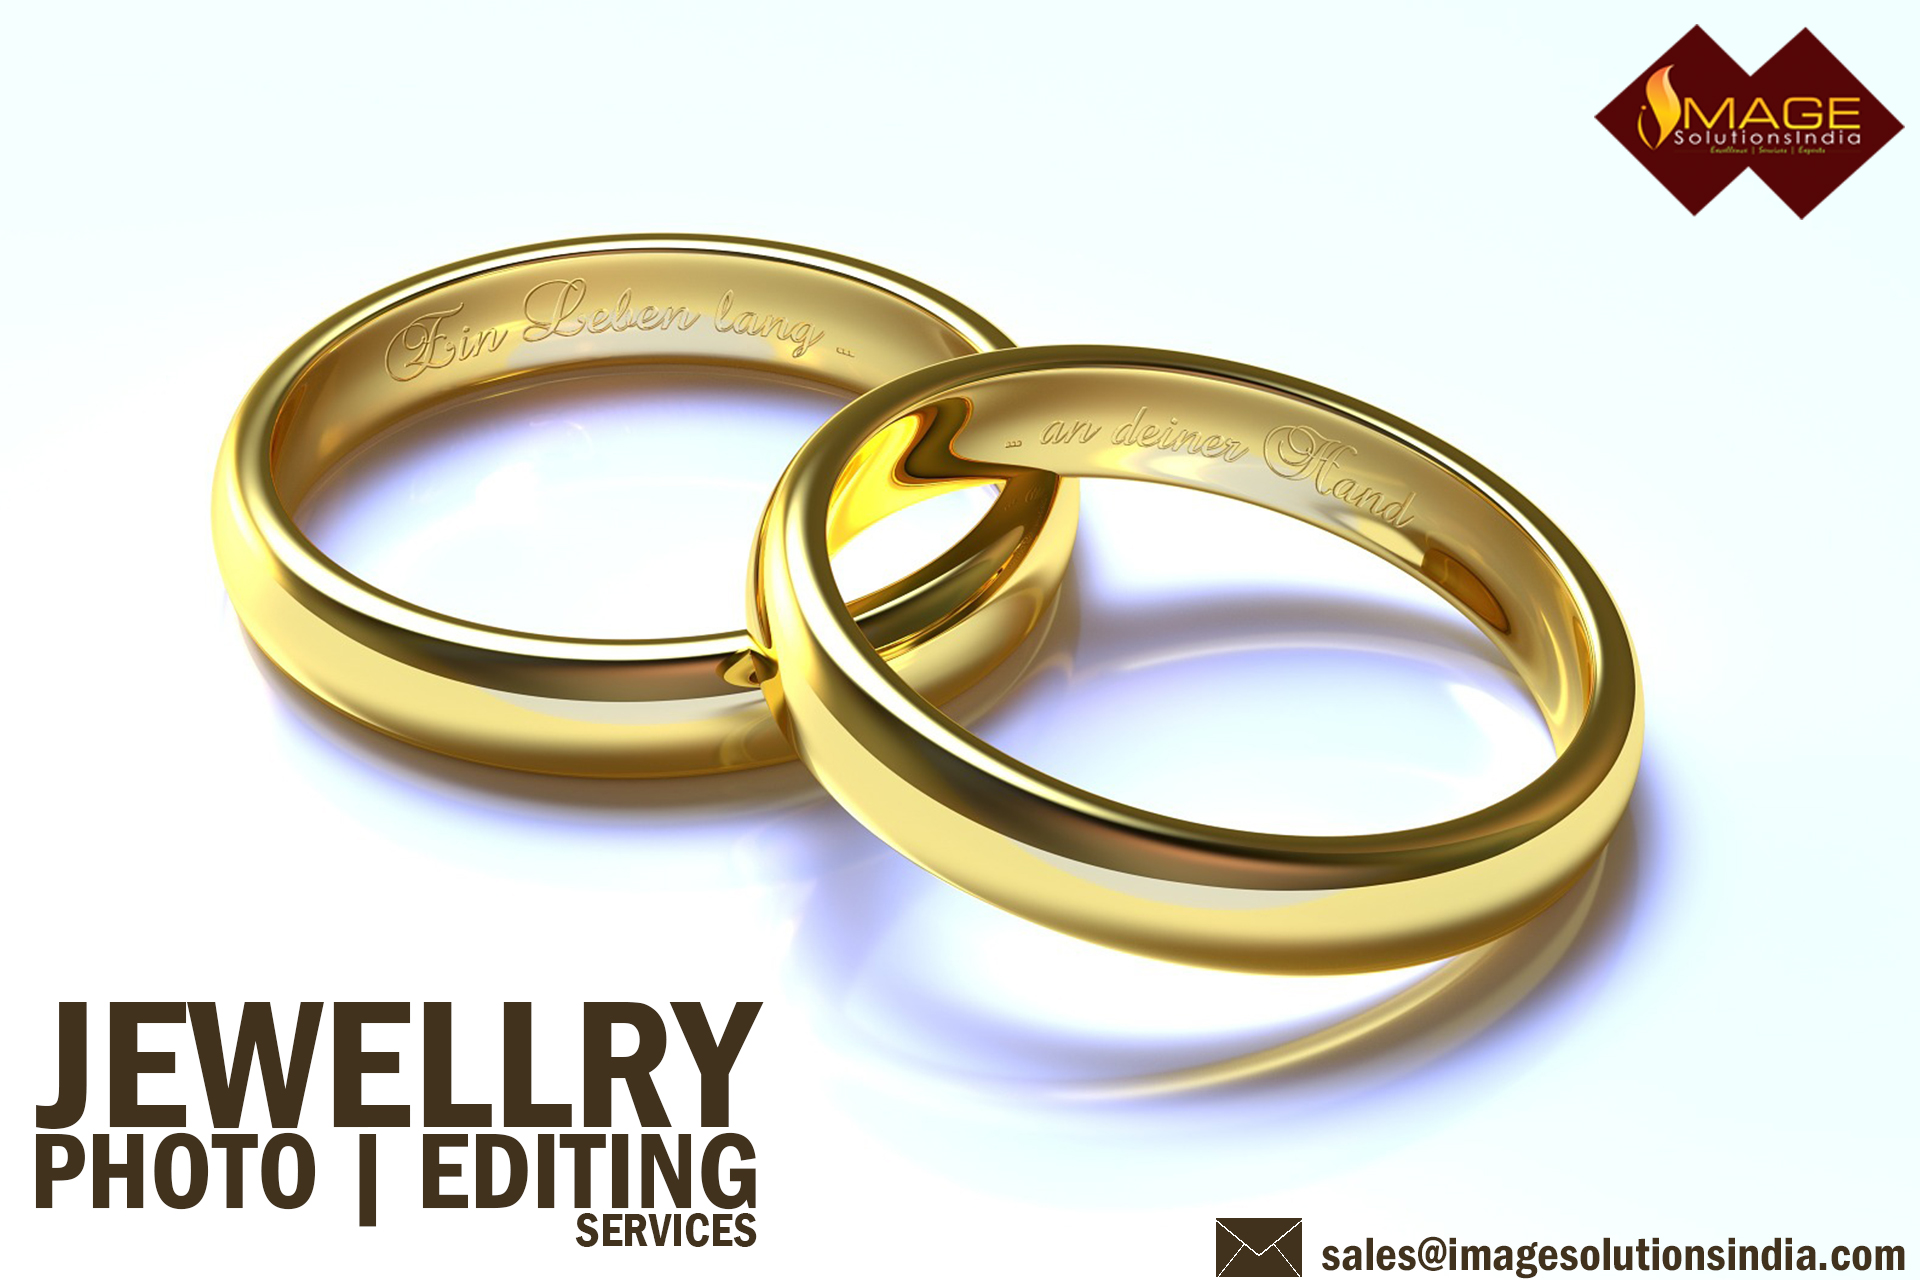 Jewelry photography editing services for online sales